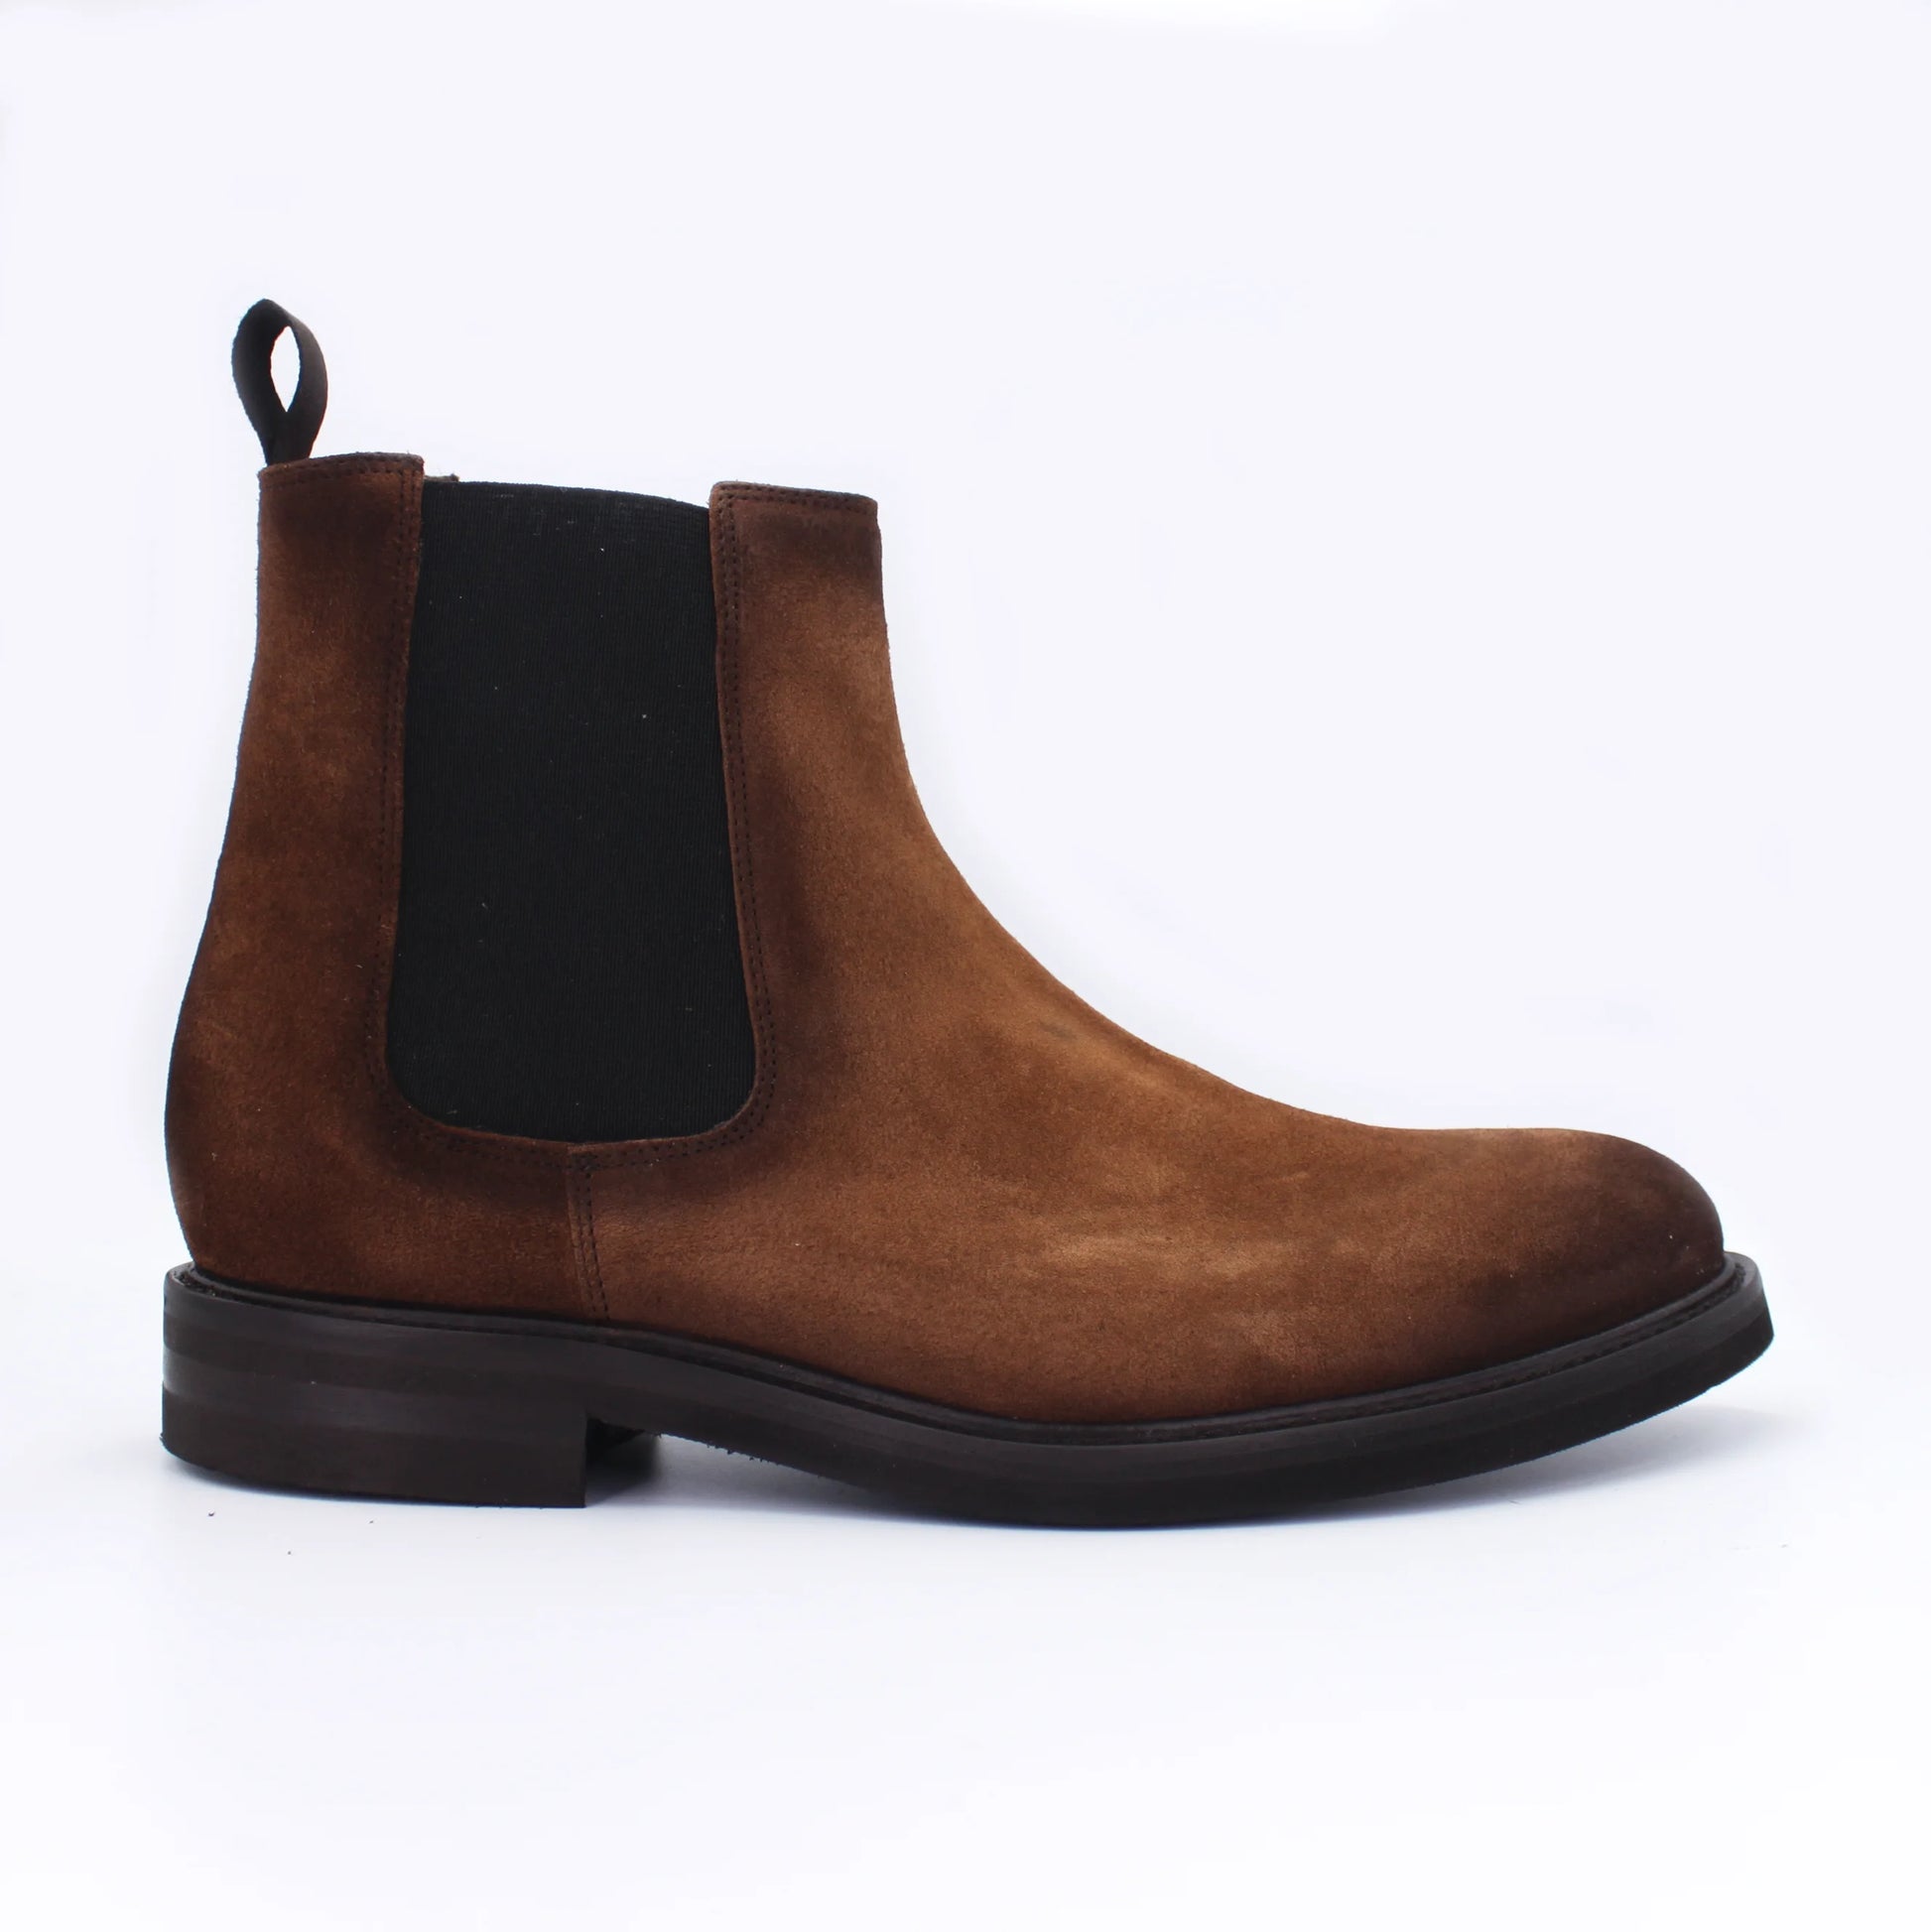 Shop Handmade Italian Leather Chealsea Boot in Tabacco (08589) or browse our range of hand-made Italian boots for men in leather or suede in-store at Aliverti Durban or Cape Town, or shop online. We deliver in South Africa & offer multiple payment plans as well as accept multiple safe & secure payment methods.